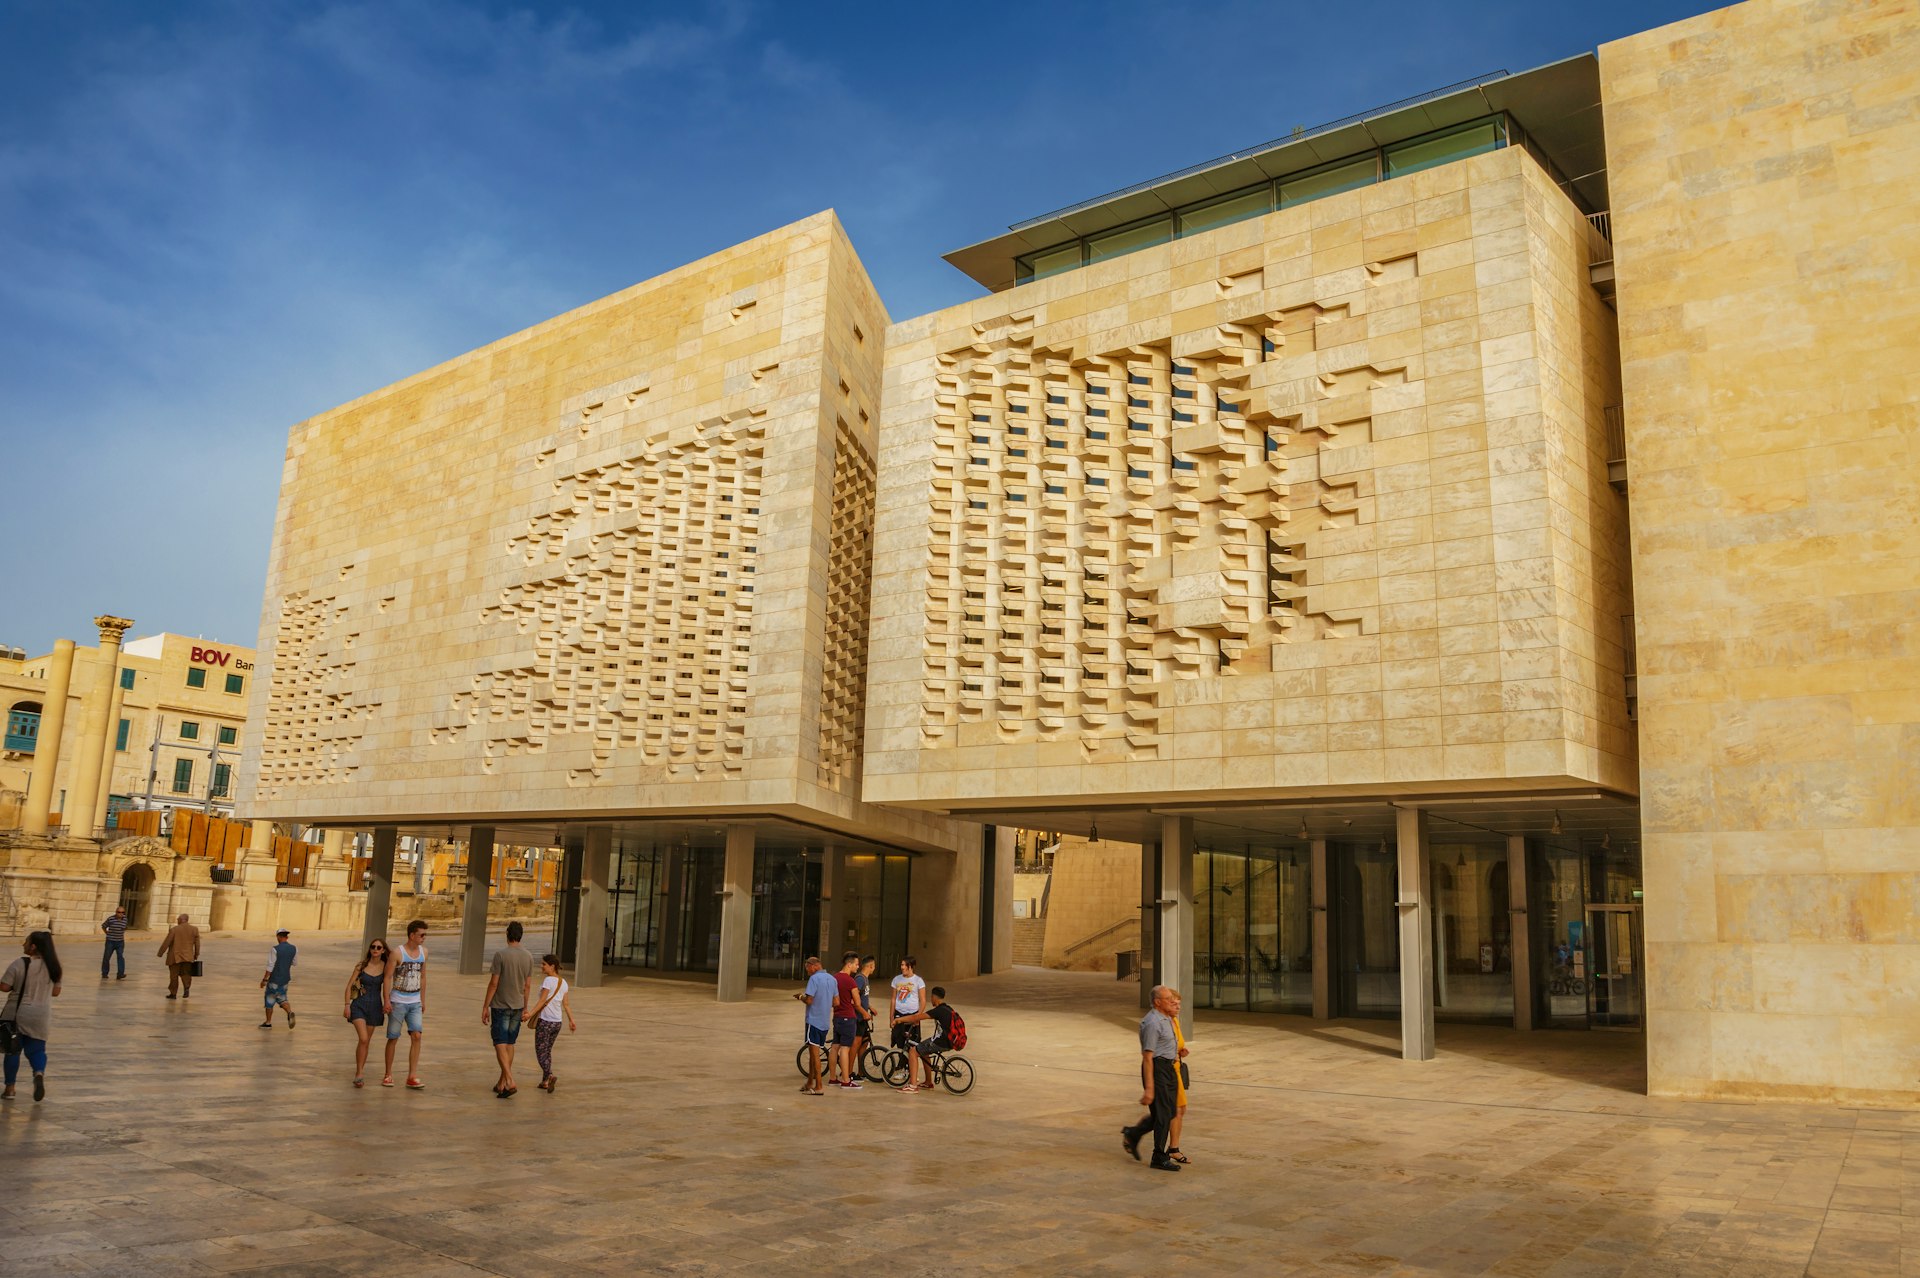 The exterior of the Parliament House in Valletta bathed in sunshine